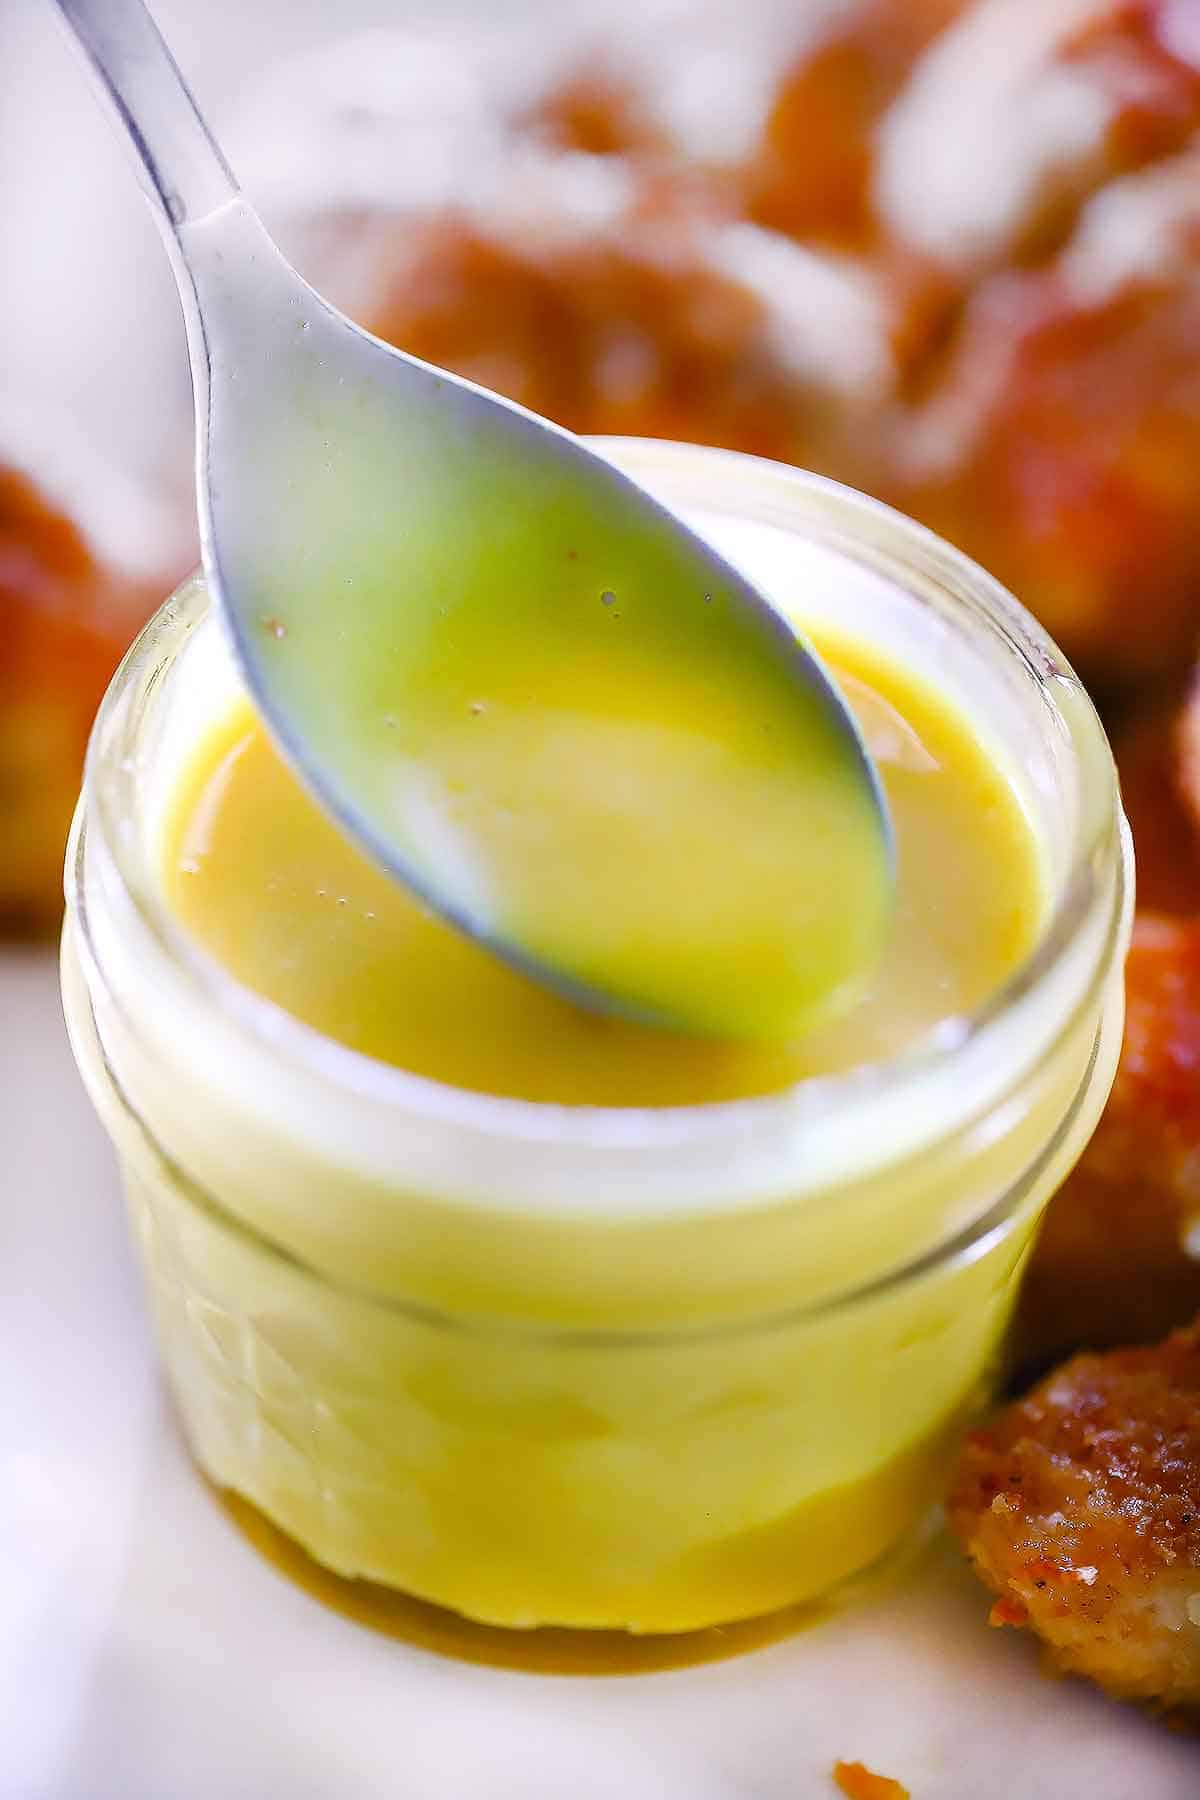 Homemade honey mustard dressing in a jar with a spoon.